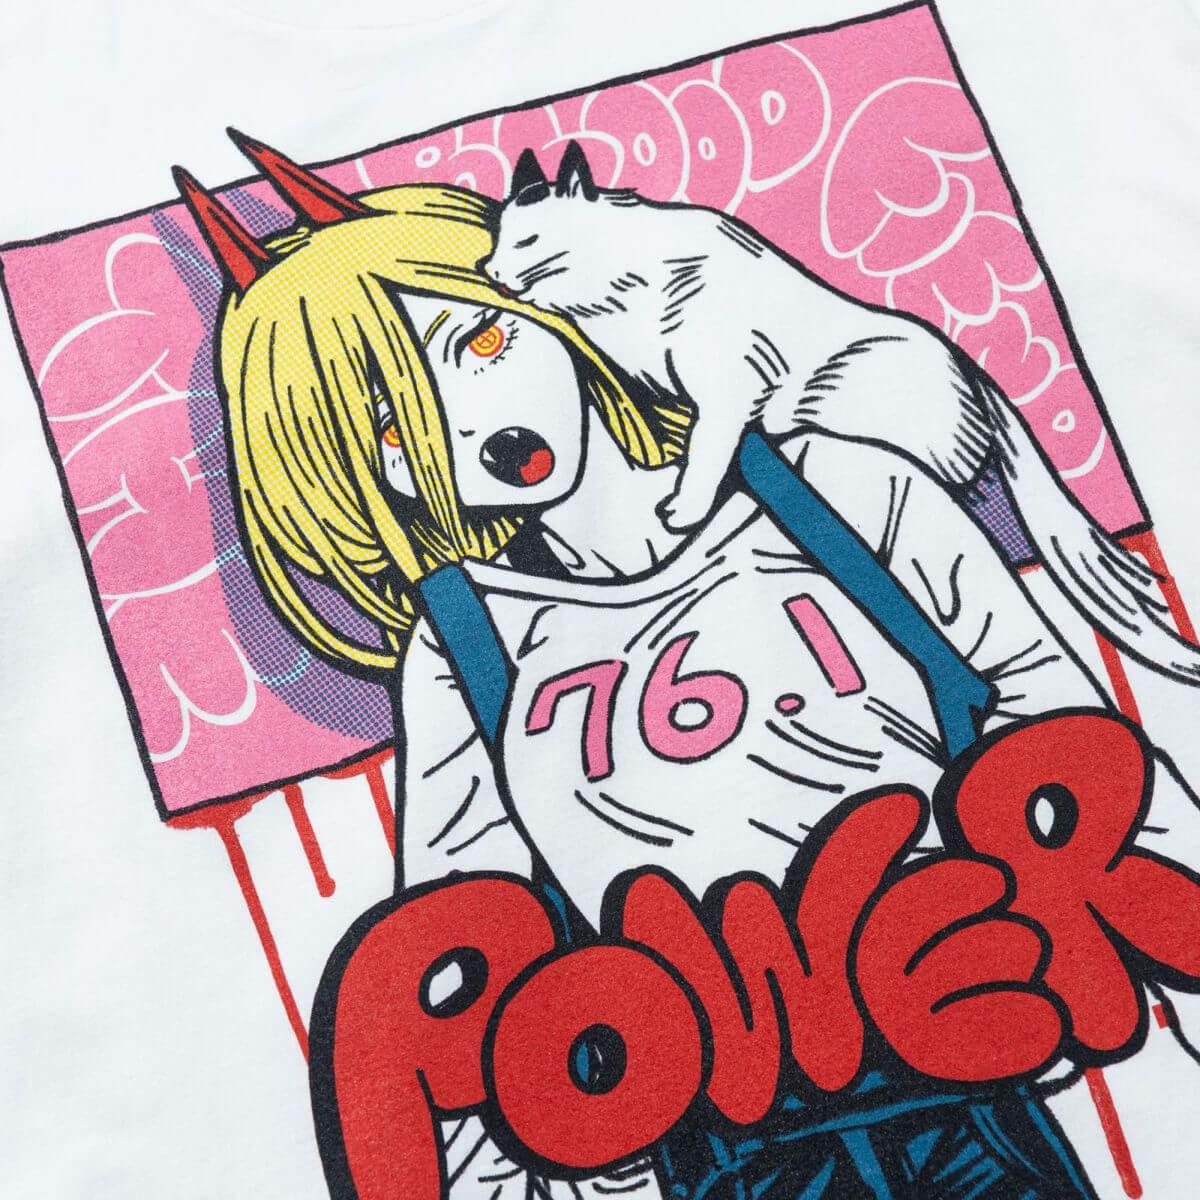 Chainsaw Man Power and Meowy Anime T-Shirt - Aesthetic Clothes Shop